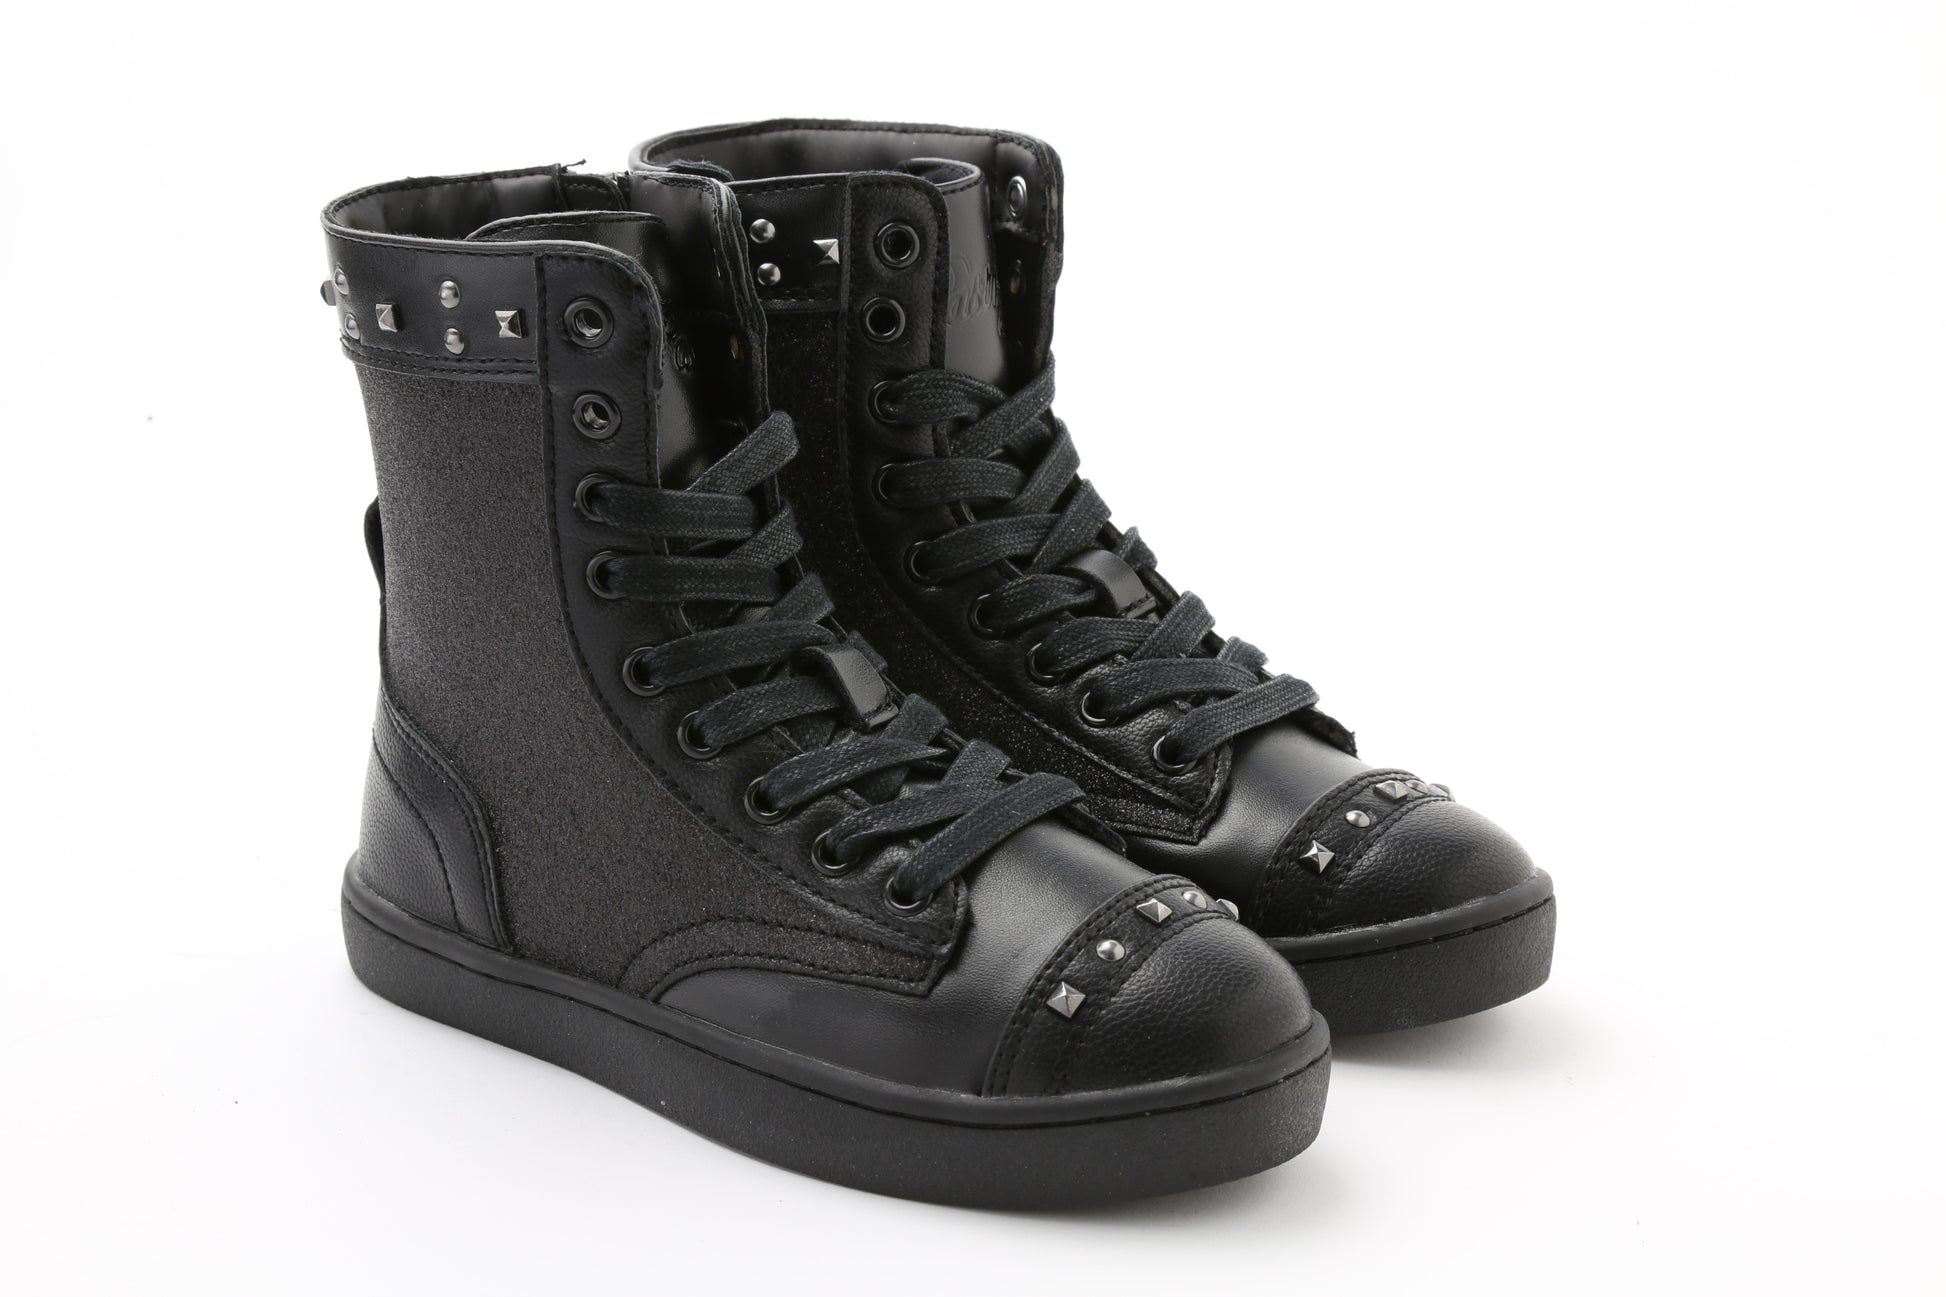 Pair of Pastry Military Glitz Youth Sneaker Boot in Black/Black in 3 quarter view